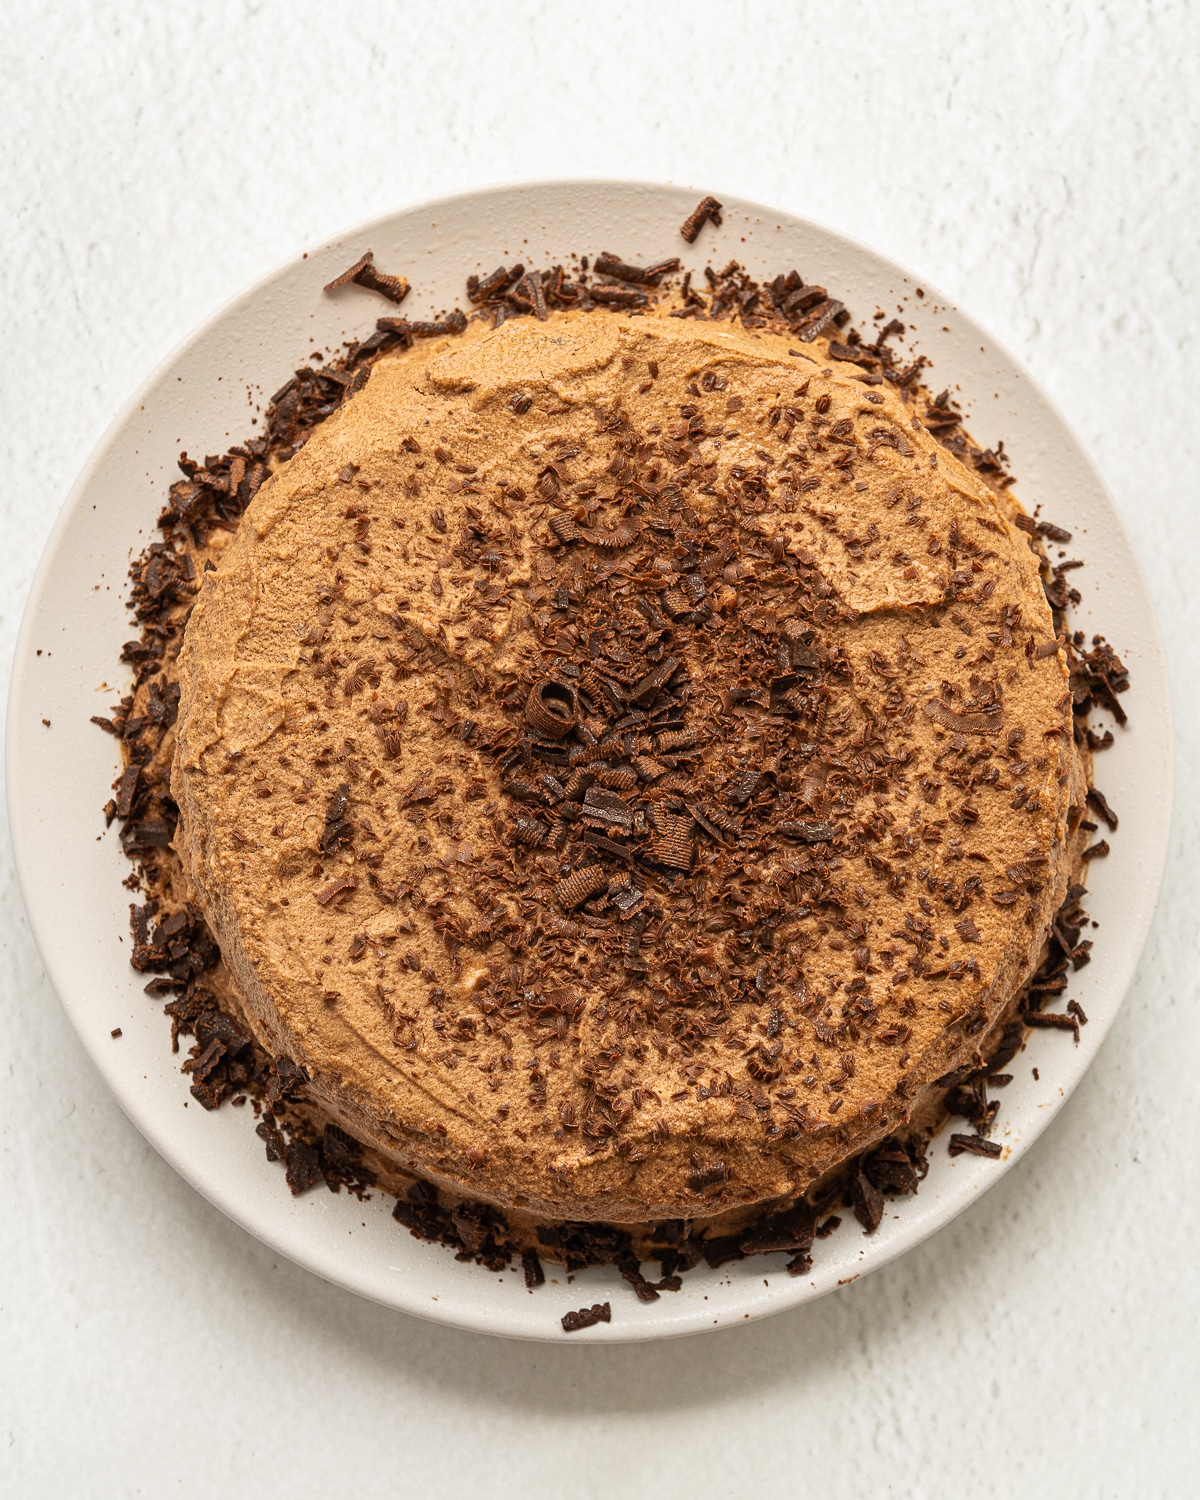 Picture of frosted chocolate mousse cake with chocolate shavings on a white plate on a white background.